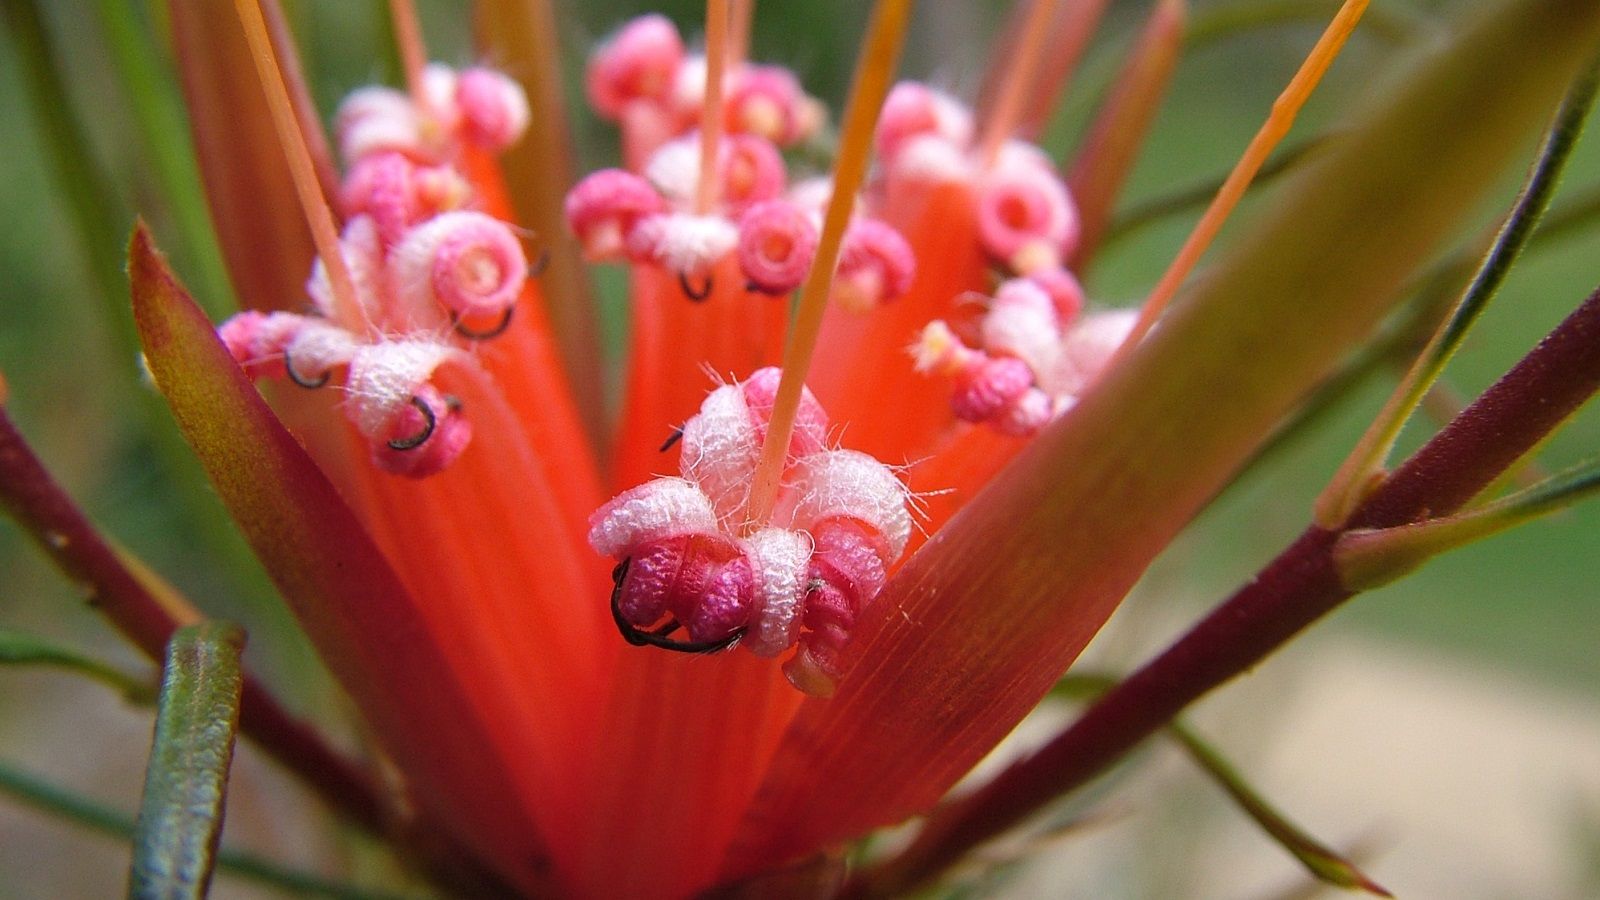 Close up photograph of a red flower with pink stamens. banner image